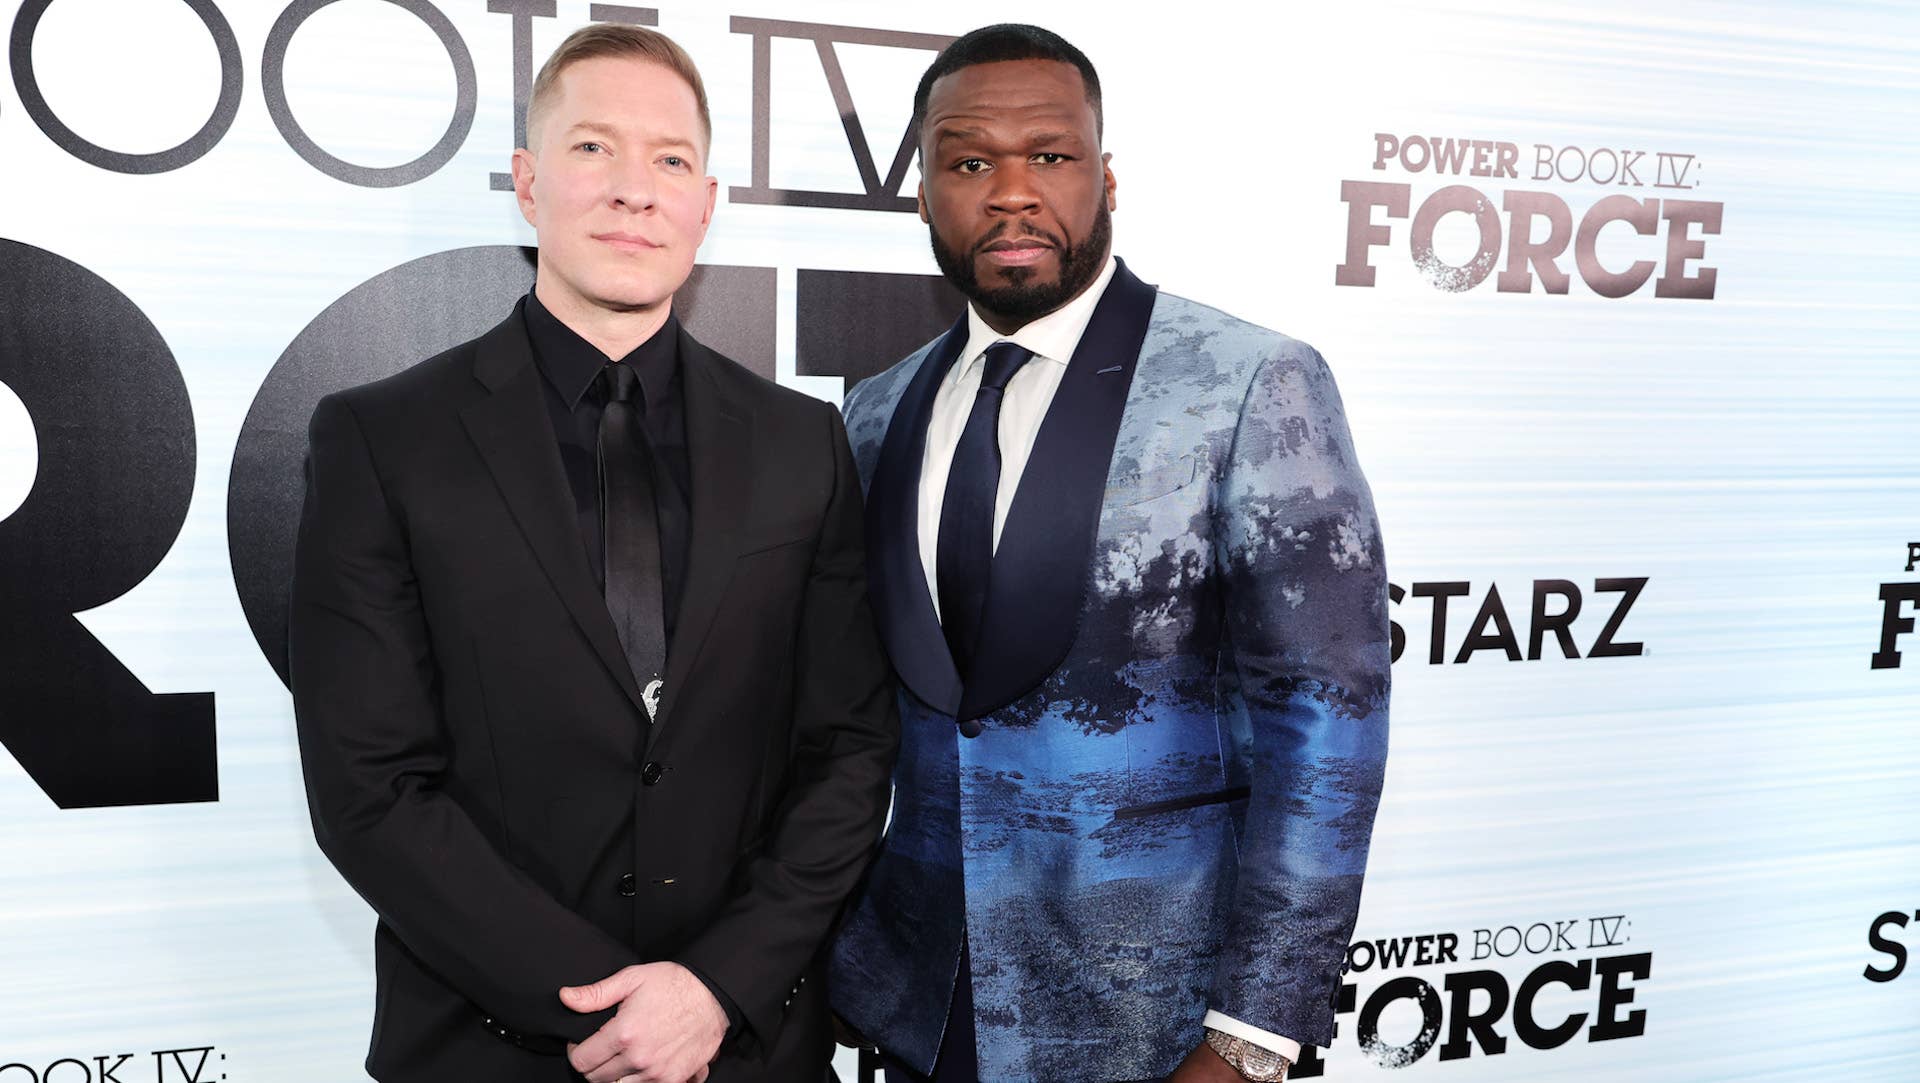 Joseph Sikora and Curtis “50 Cent” Jackson attend the Power Book IV: Force Premiere at Pier 17 Rooftop on